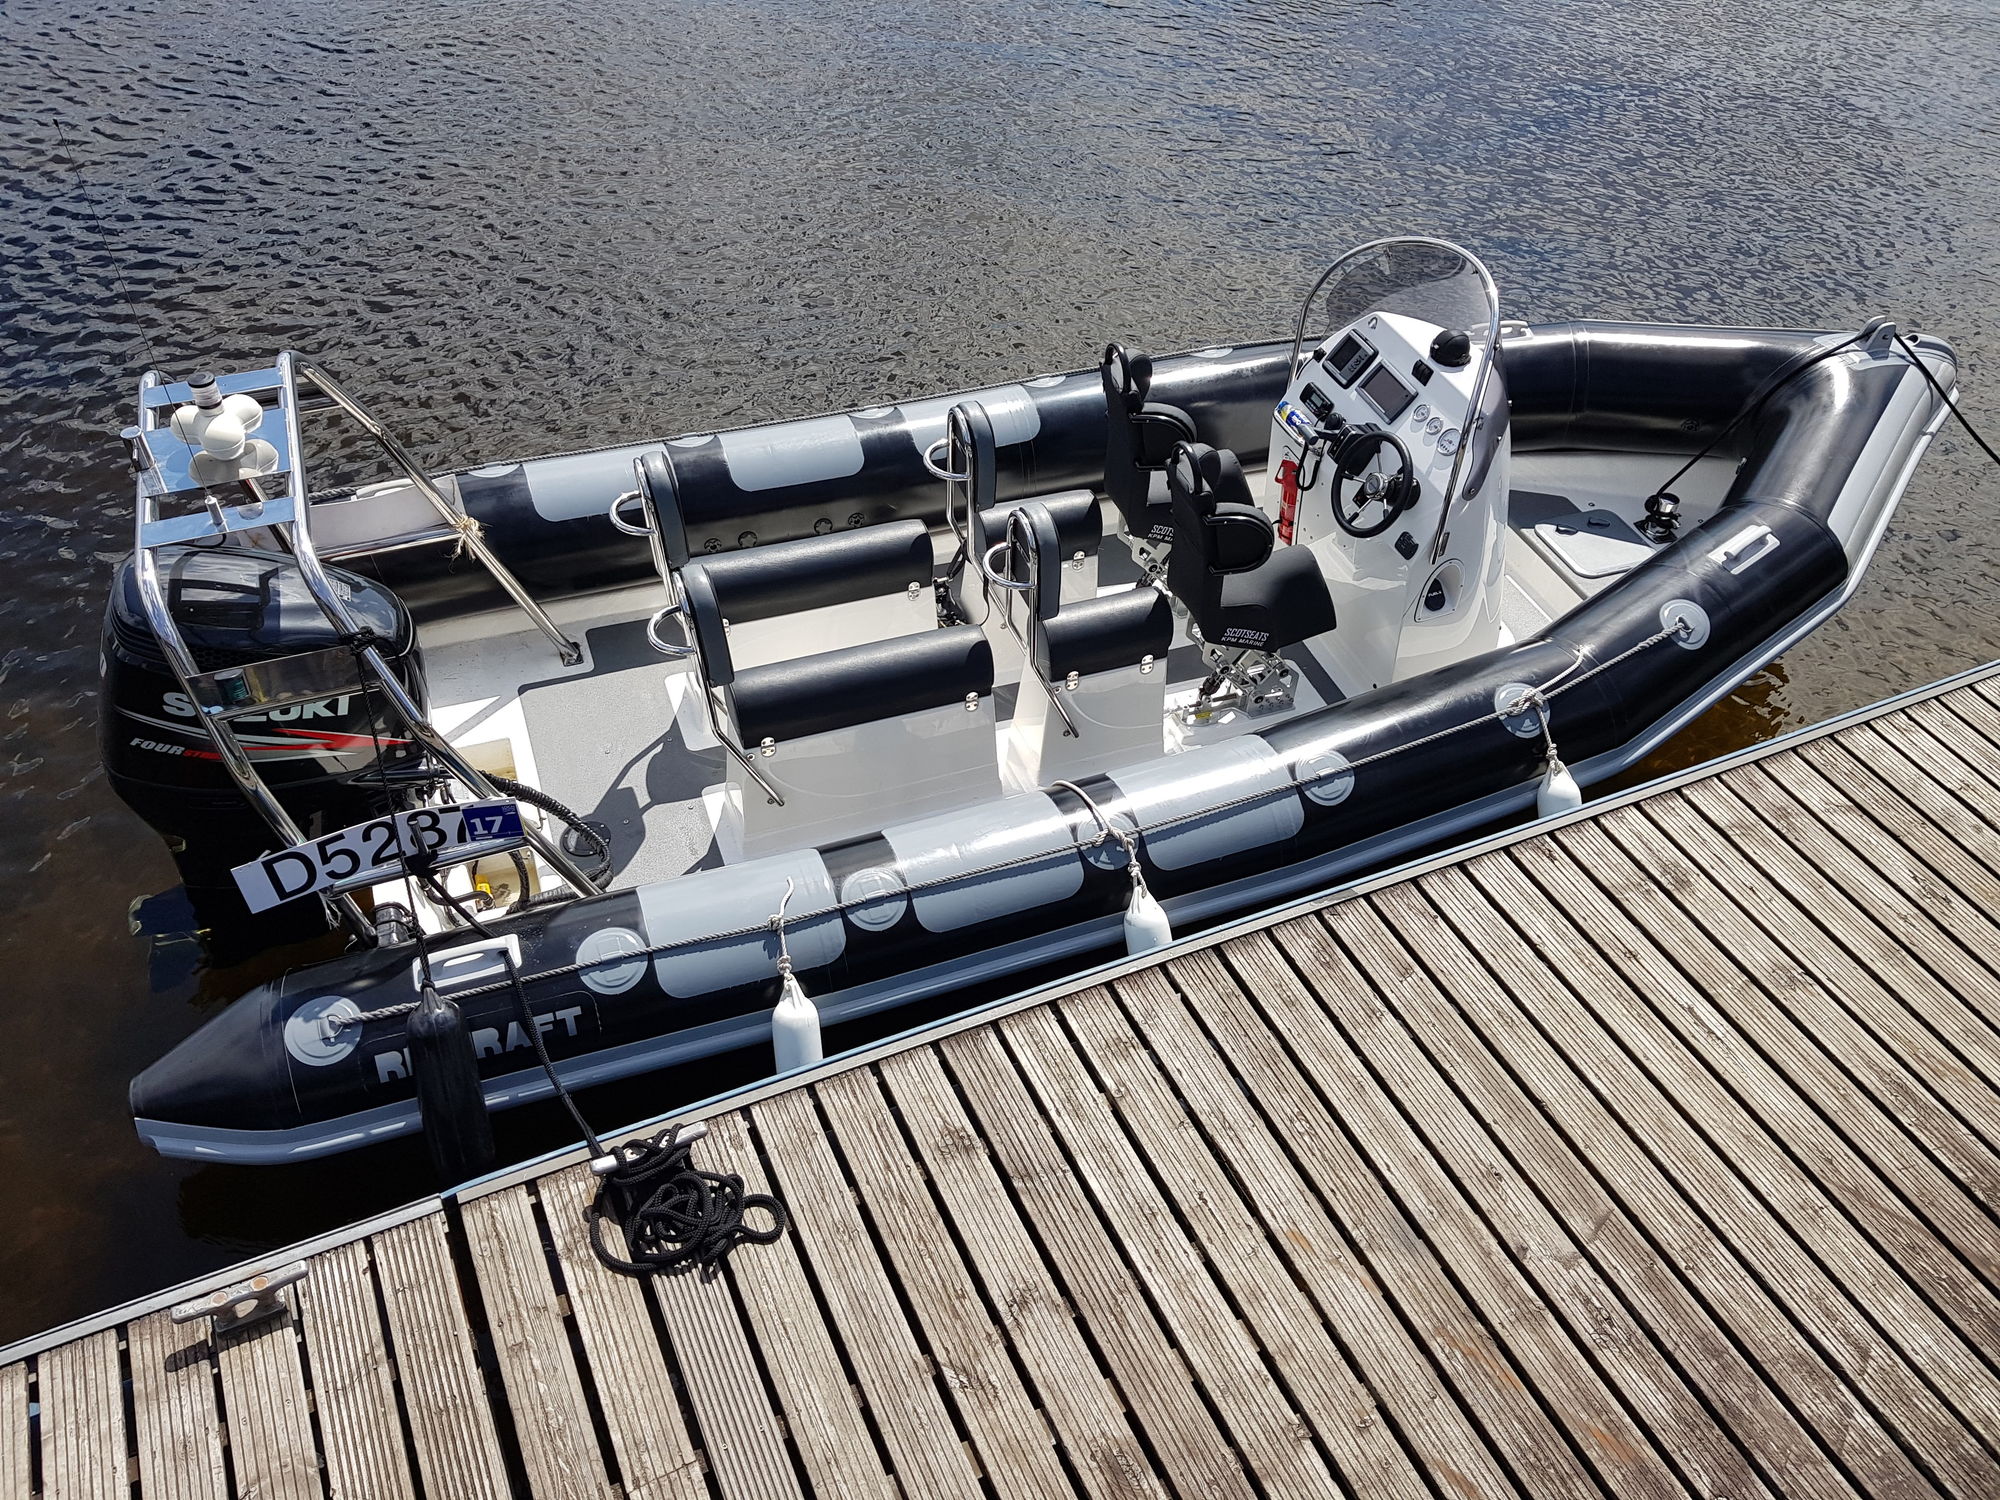 Suspension seats - opinions - The Hull Truth - Boating and Fishing Forum